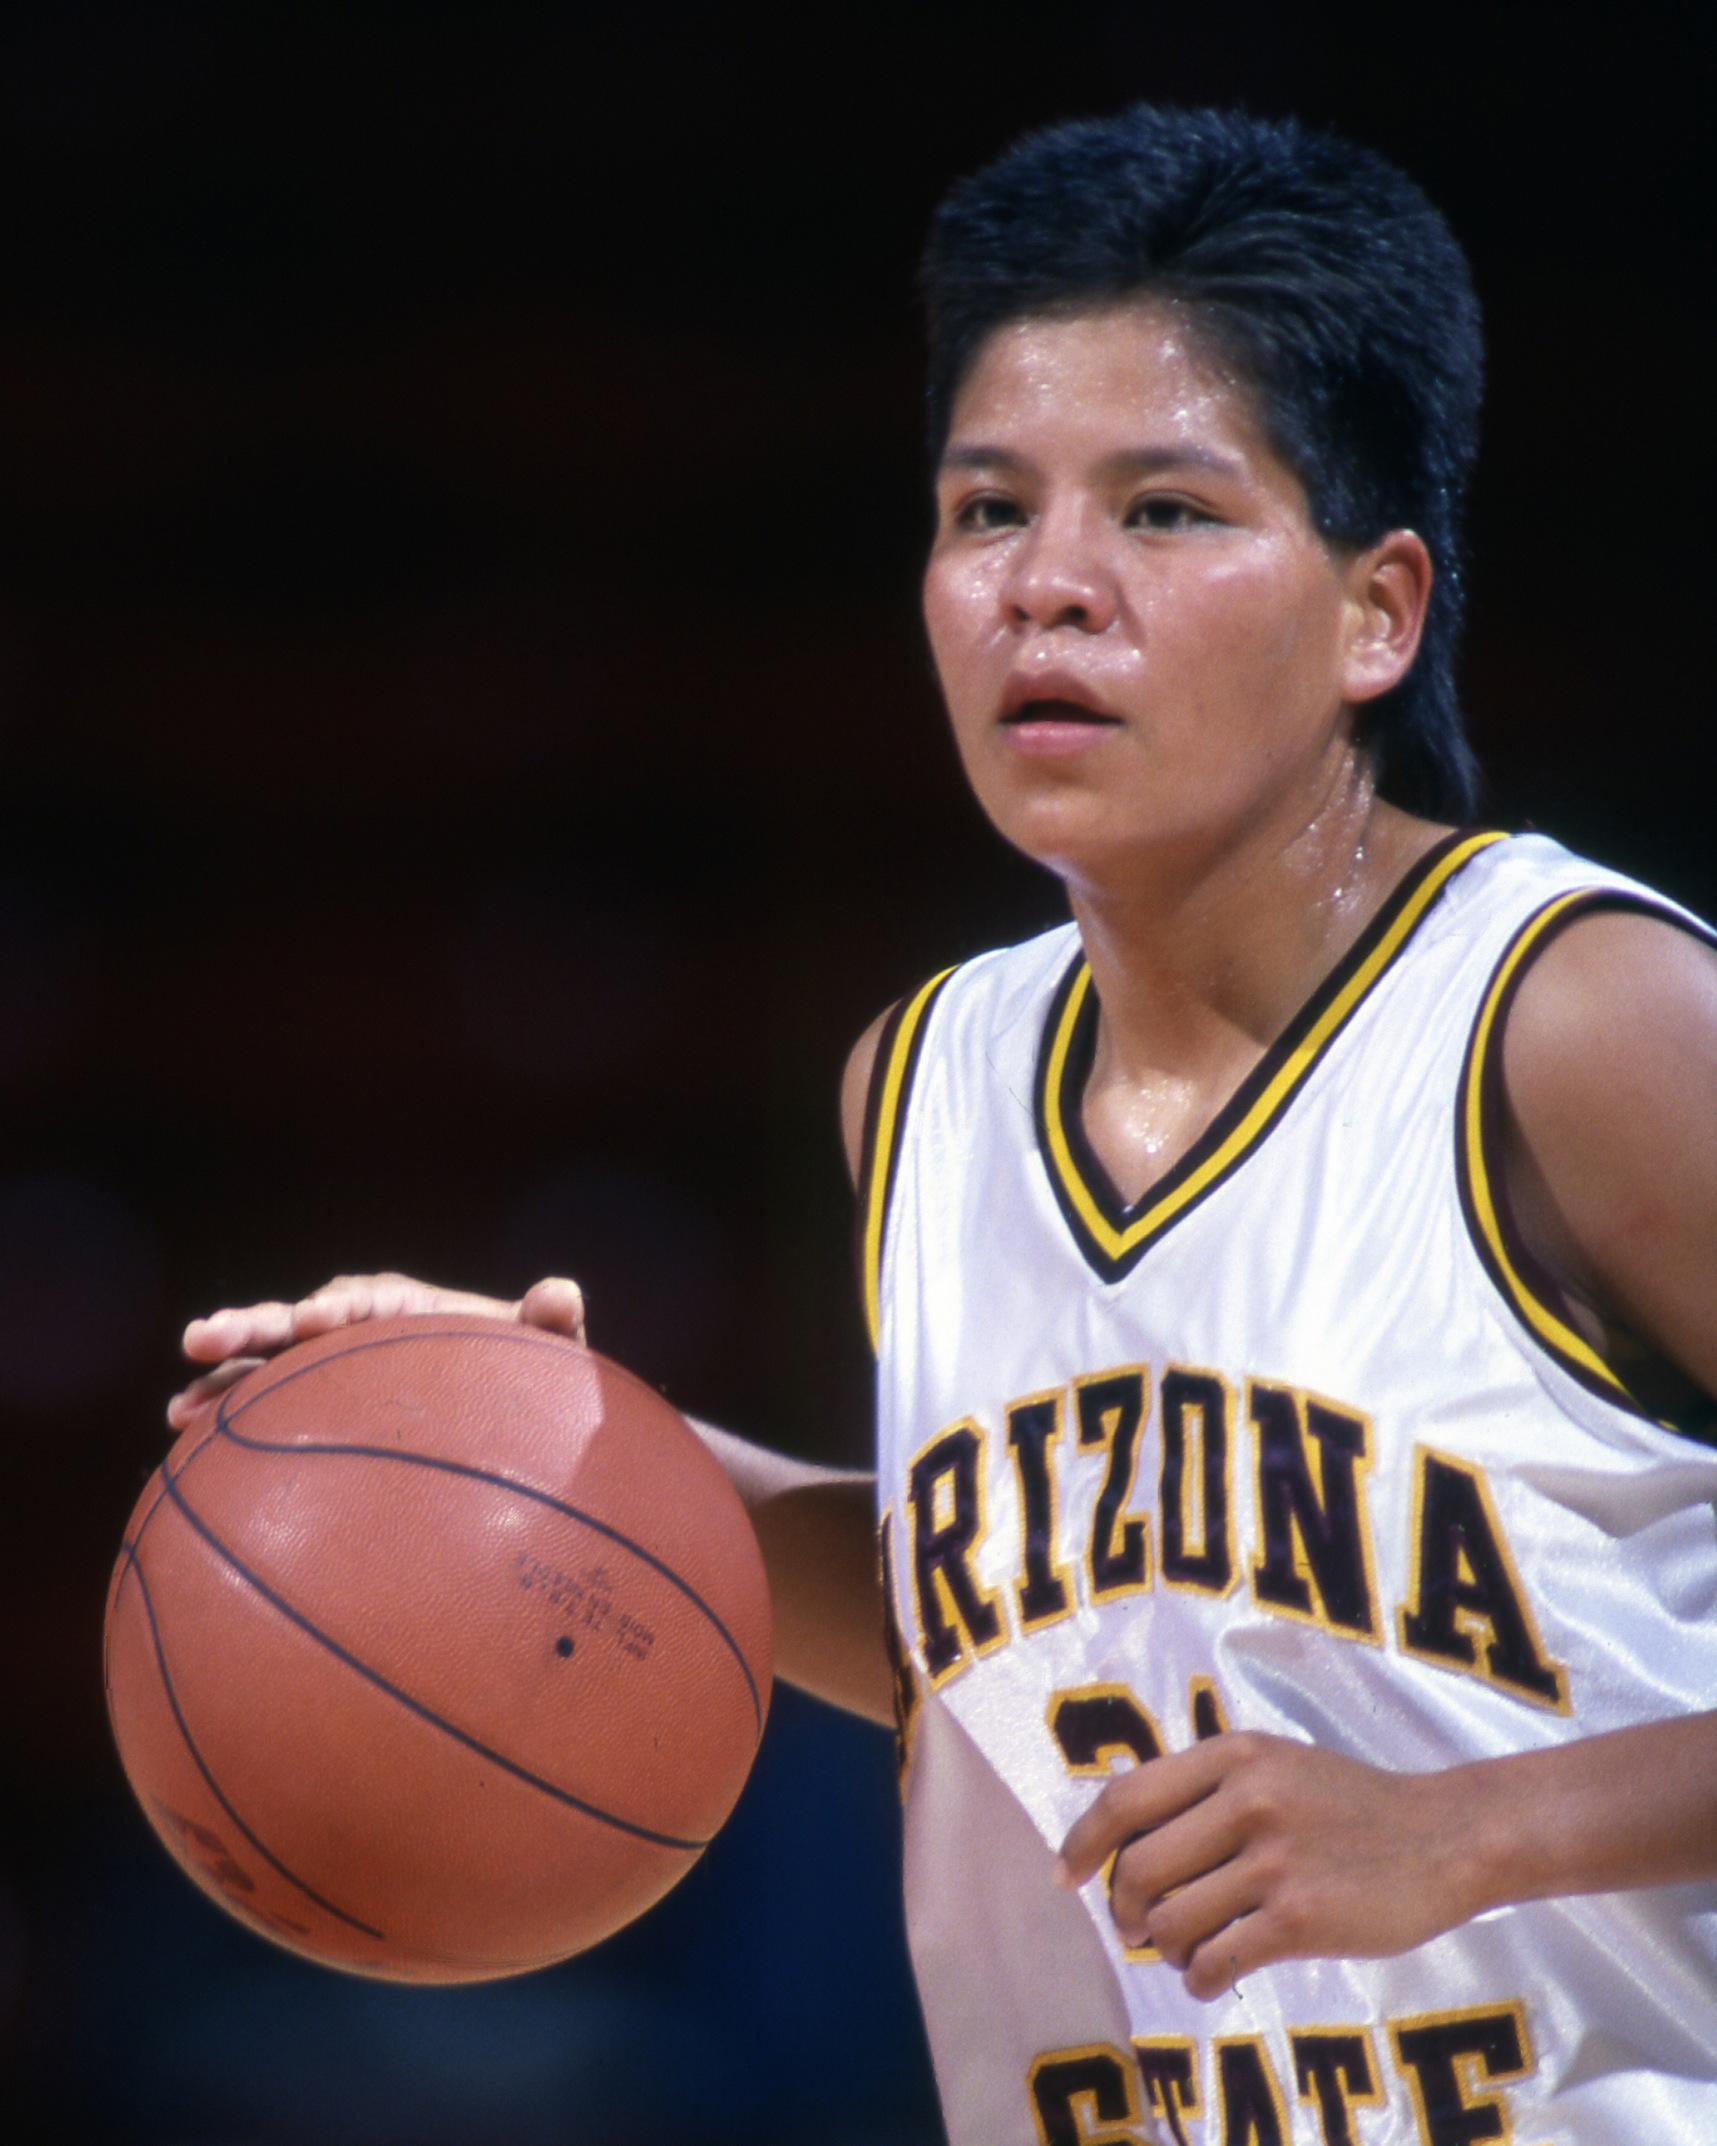 Women’s basketball pioneer found SCC at right time, made Navajo Nation proud